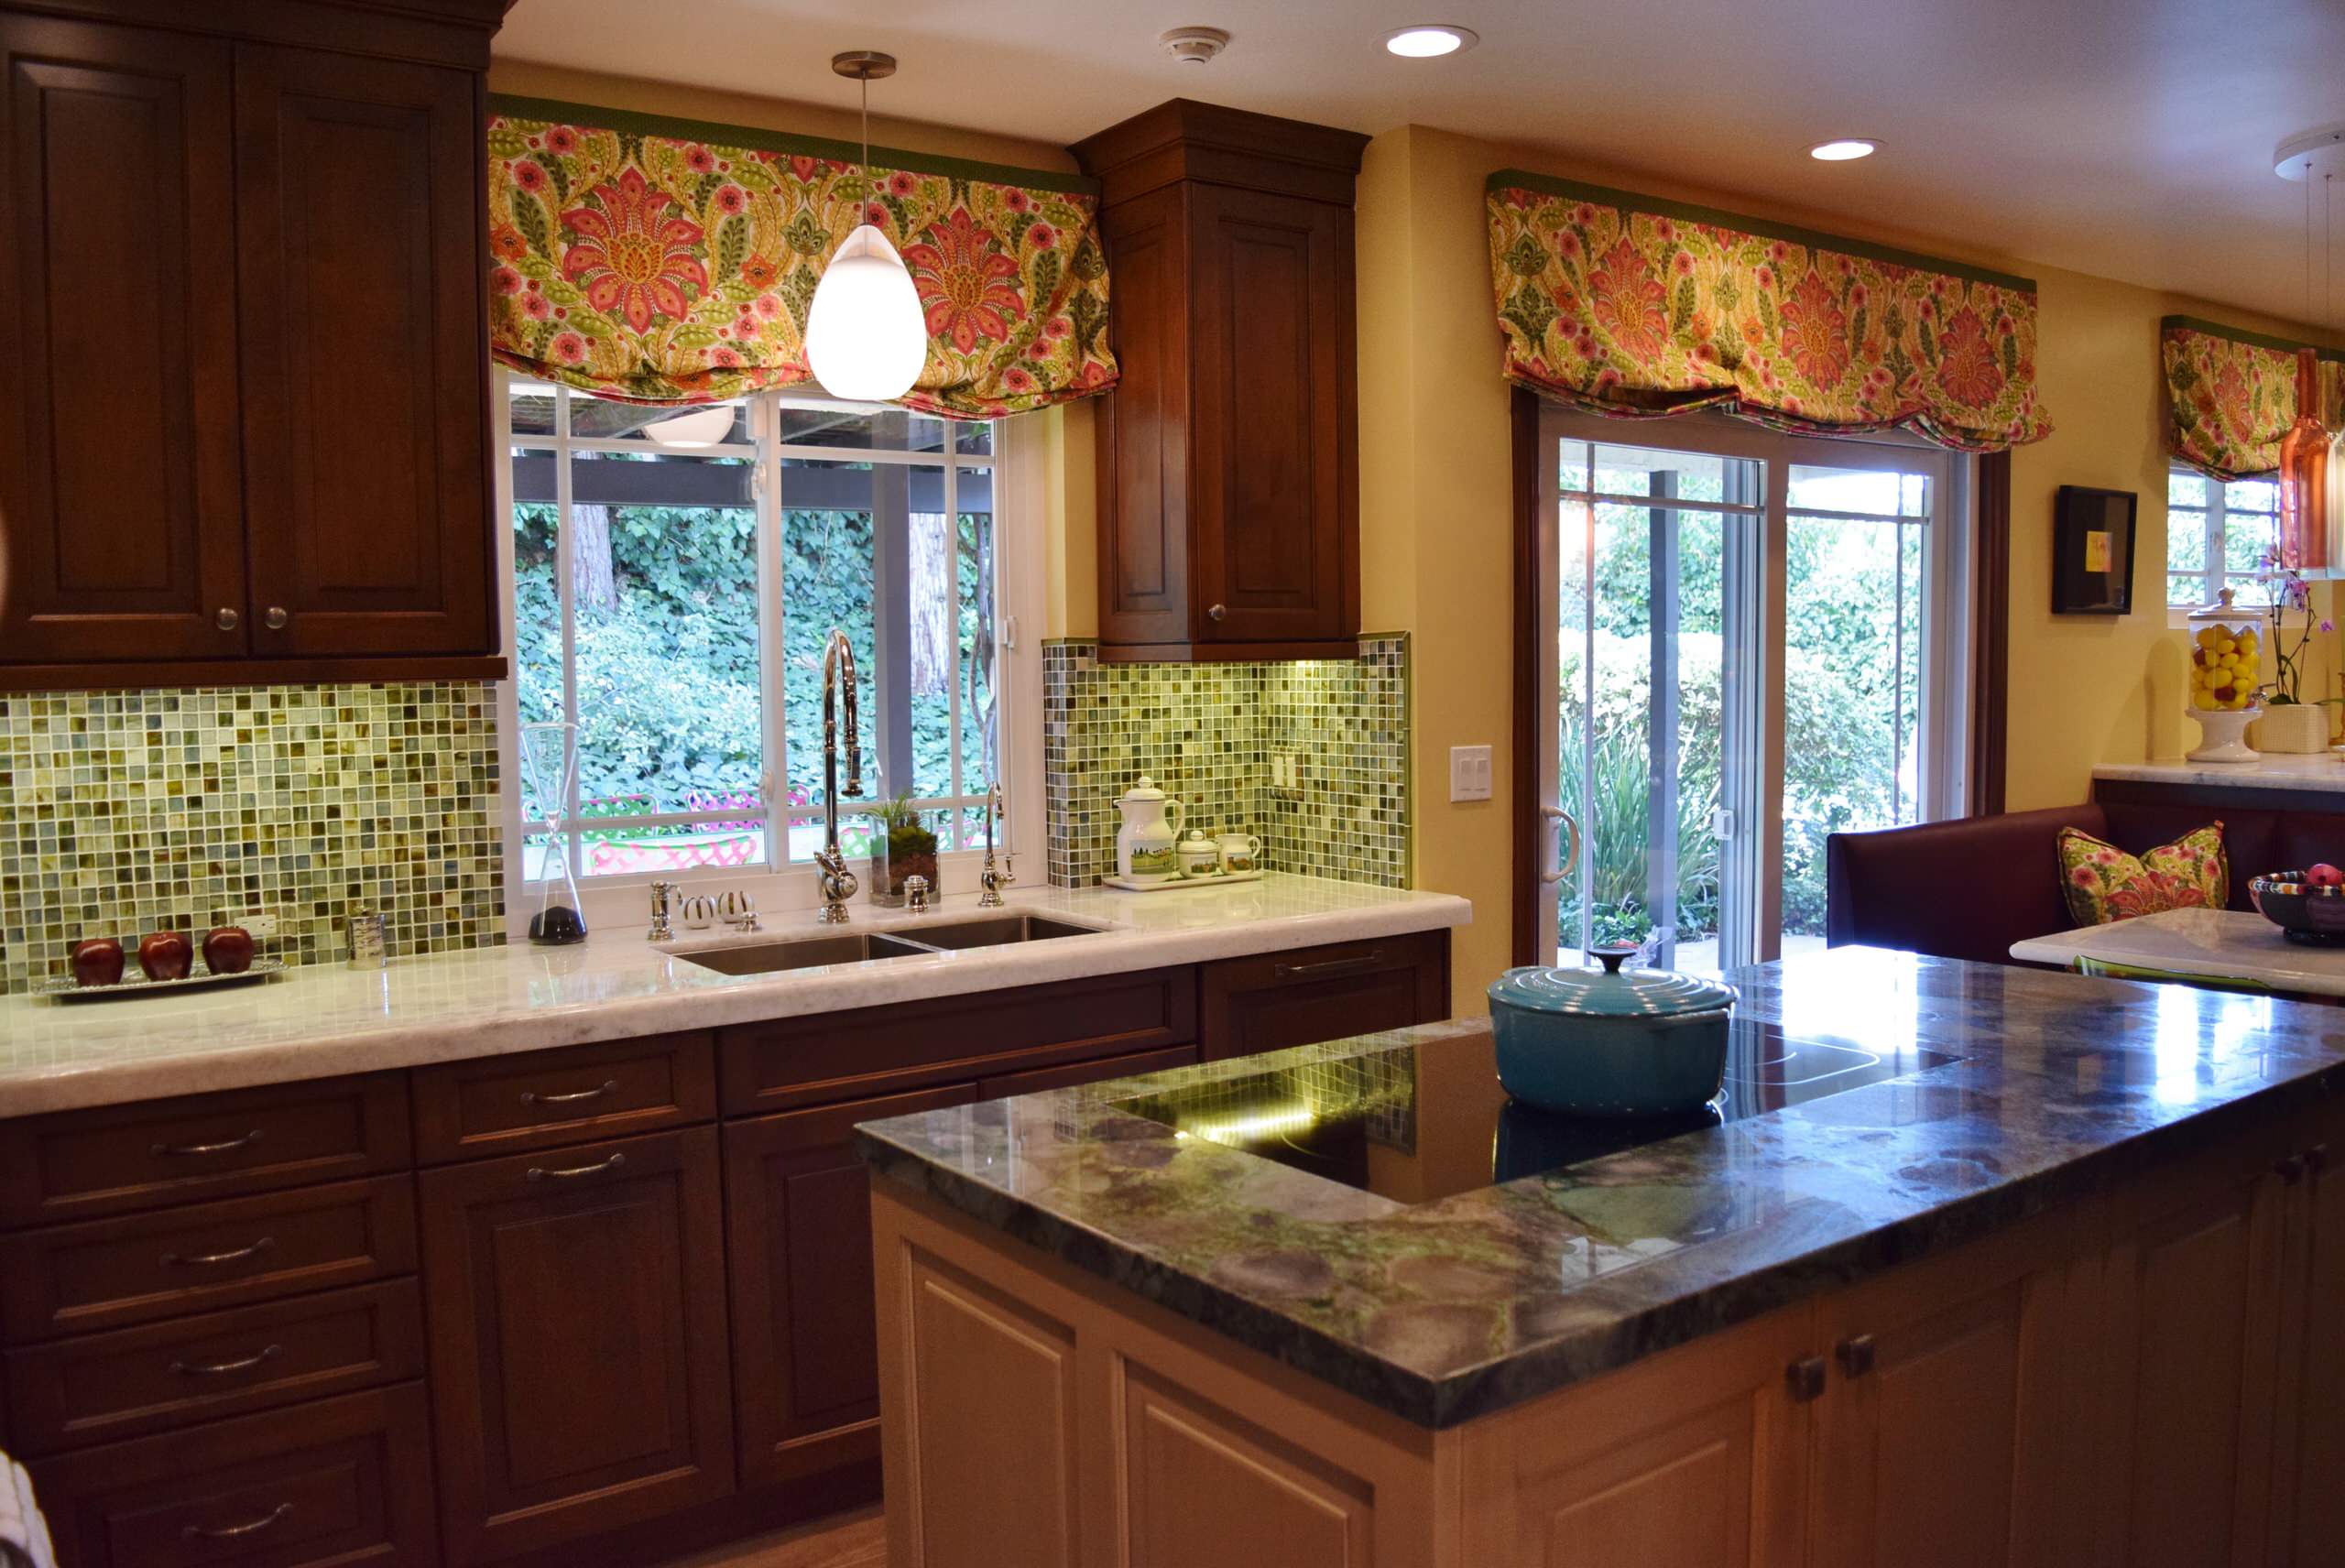 The Rubin Traditional Kitchen Remodel in Encino, Ca.